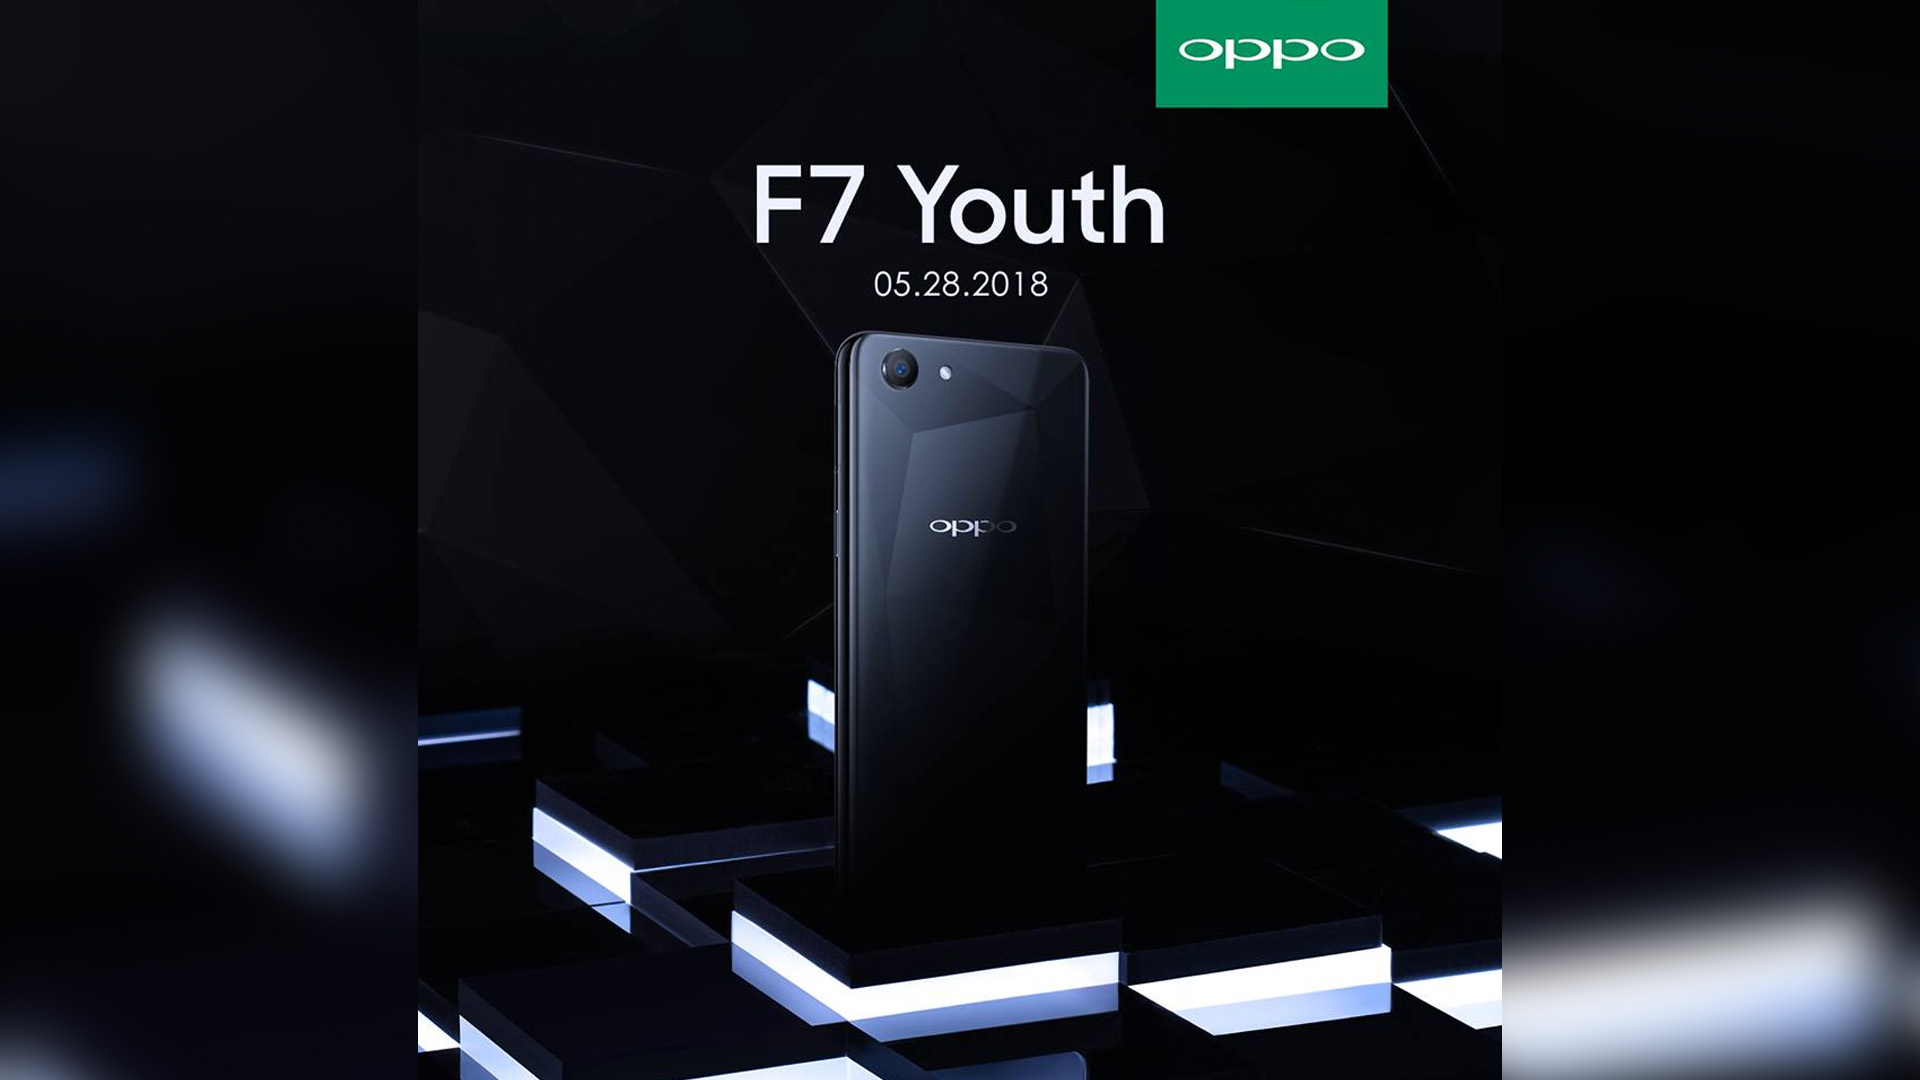 OPPO-F7-Youth launched